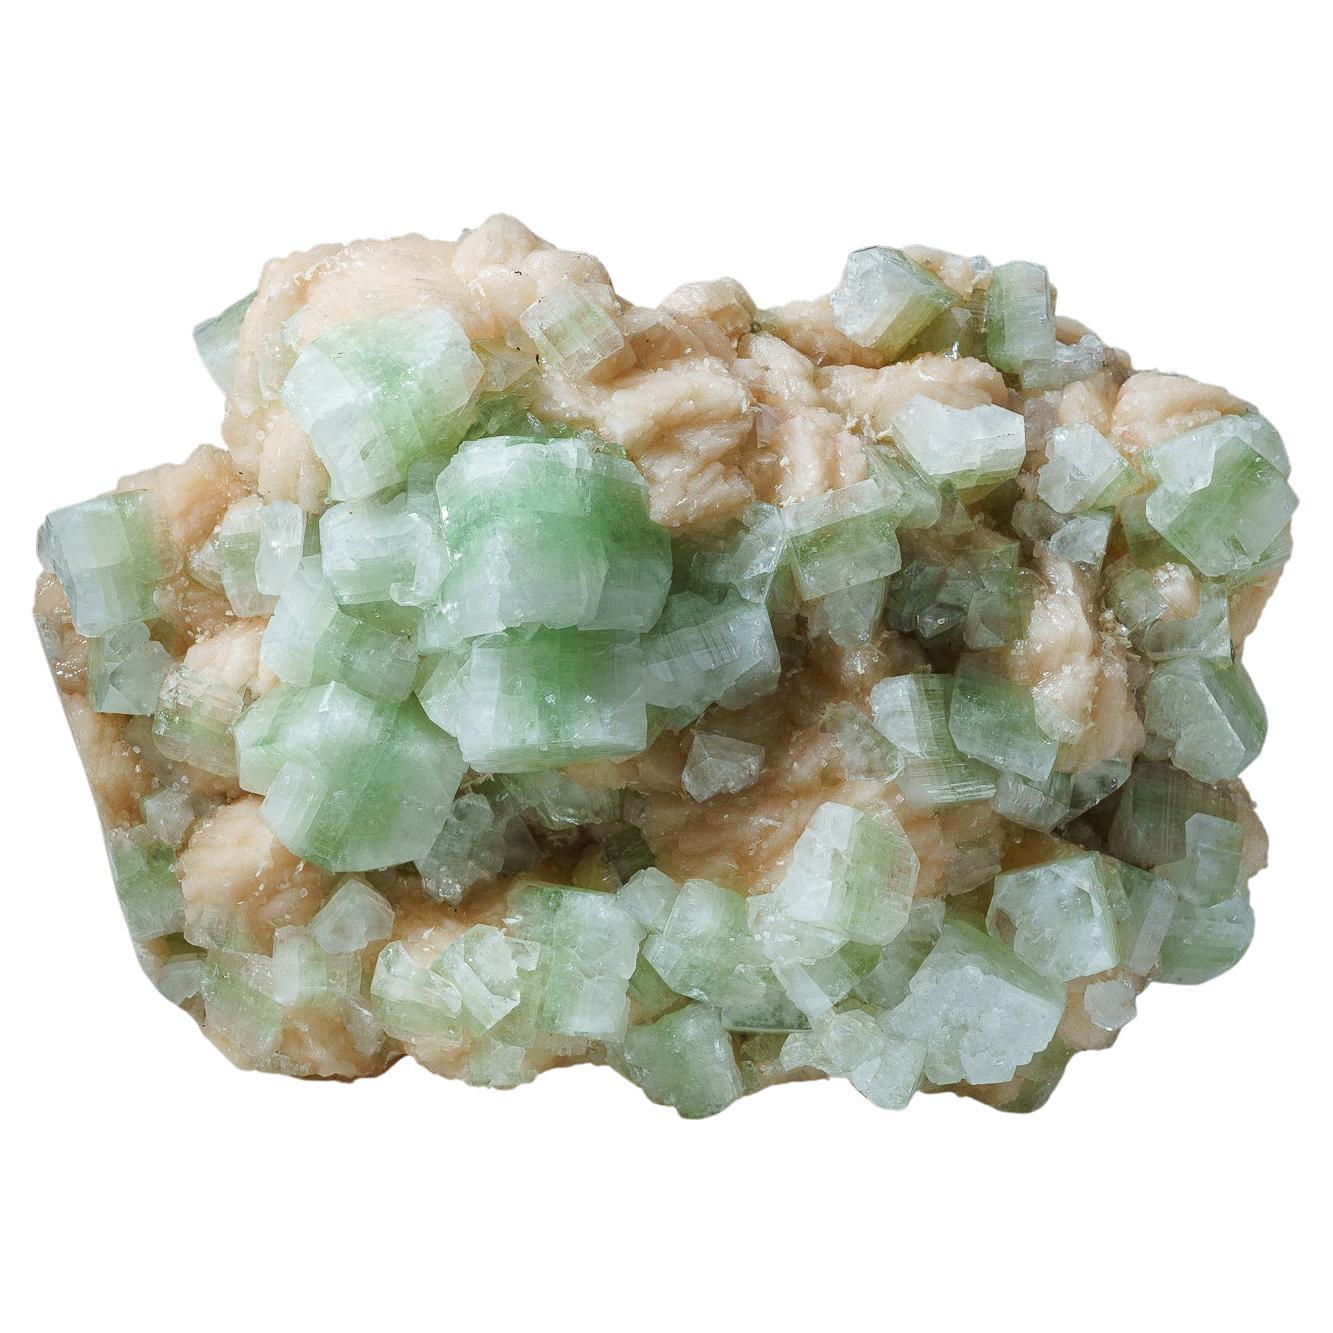 Gem Green Apophyllite Mineral with Stilbite from India (16 lbs.) For Sale